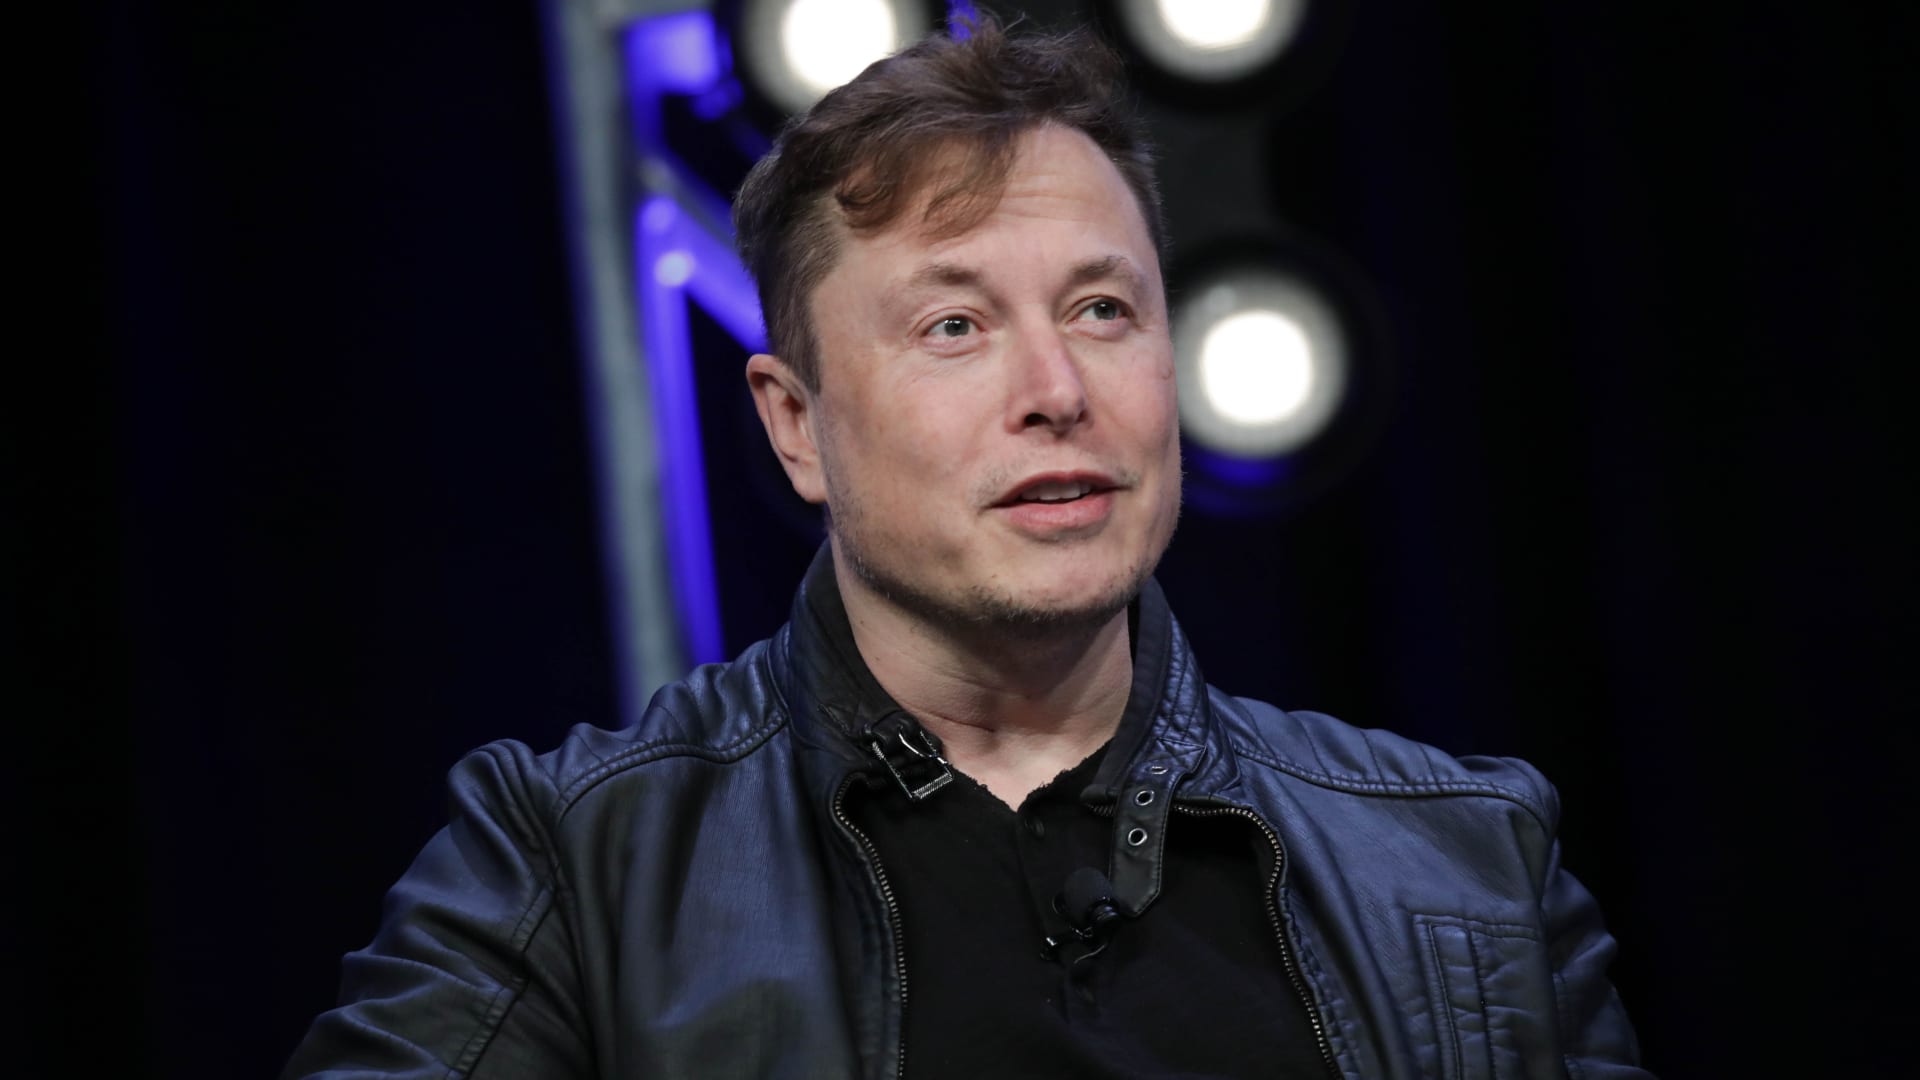 Elon Musk has criticized Apple for years. Apple has mostly ignored him Auto Recent